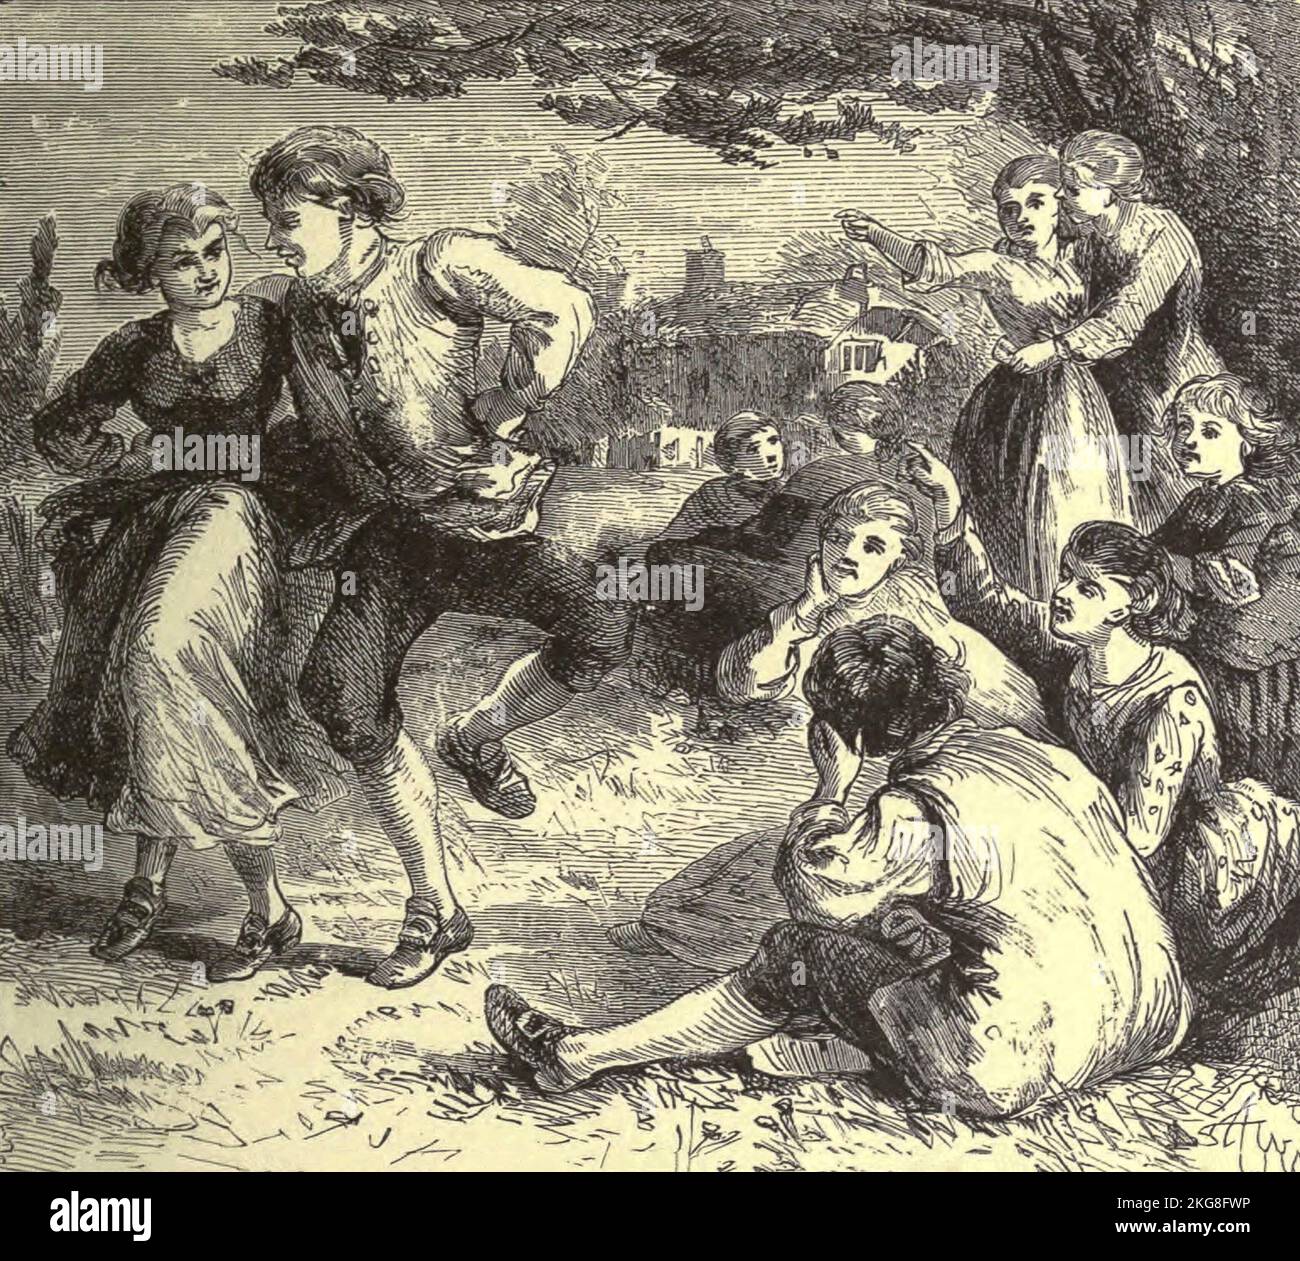 The dancing pair that simply sought renown. By holding out, to tire each other down Illustration by Hammatt Billings from the poem The Deserted Village by Oliver Goldsmith published in 1882. The Deserted Village is a poem by Oliver Goldsmith published in 1770. It is a work of social commentary, and condemns rural depopulation and the pursuit of excessive wealth. Oliver Goldsmith (10 November 1728 – 4 April 1774) was an Anglo-Irish novelist, playwright, dramatist and poet, who is best known for his novel The Vicar of Wakefield (1766), his pastoral poem The Deserted Village (1770), and his plays Stock Photo